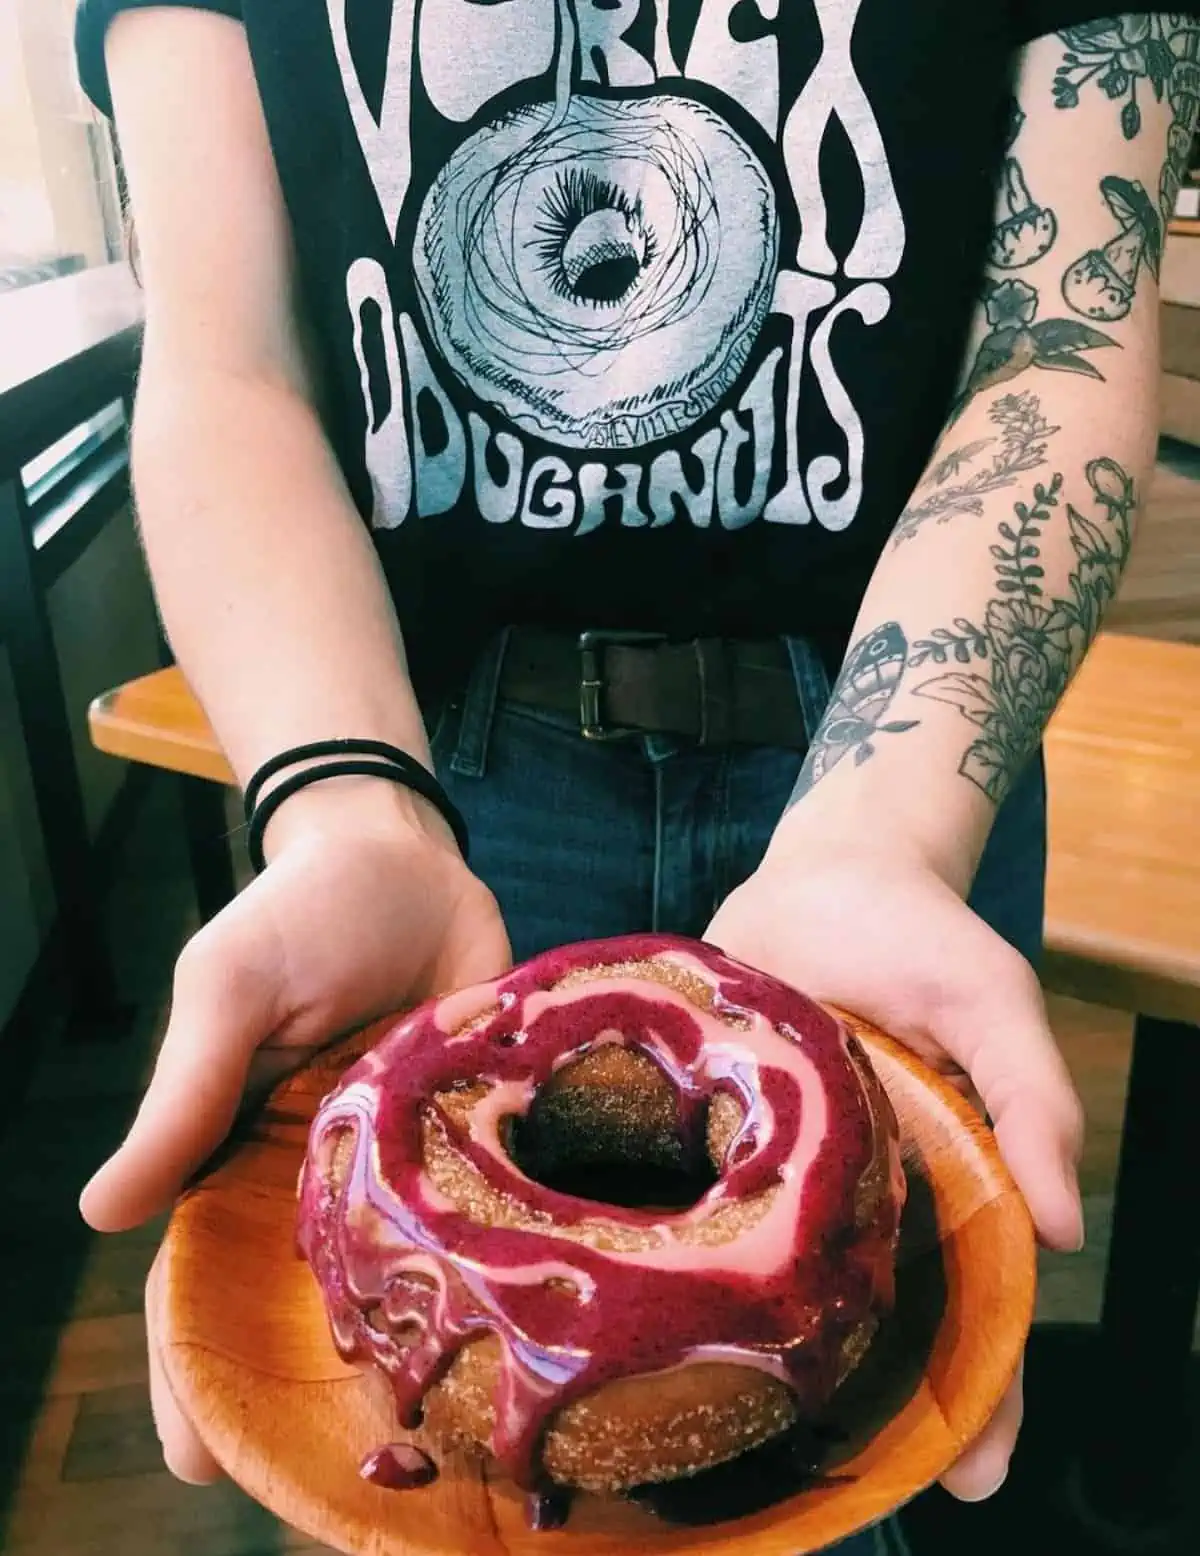 A fruity tooty vegan donut from Vortex Doughnuts in Asheville.